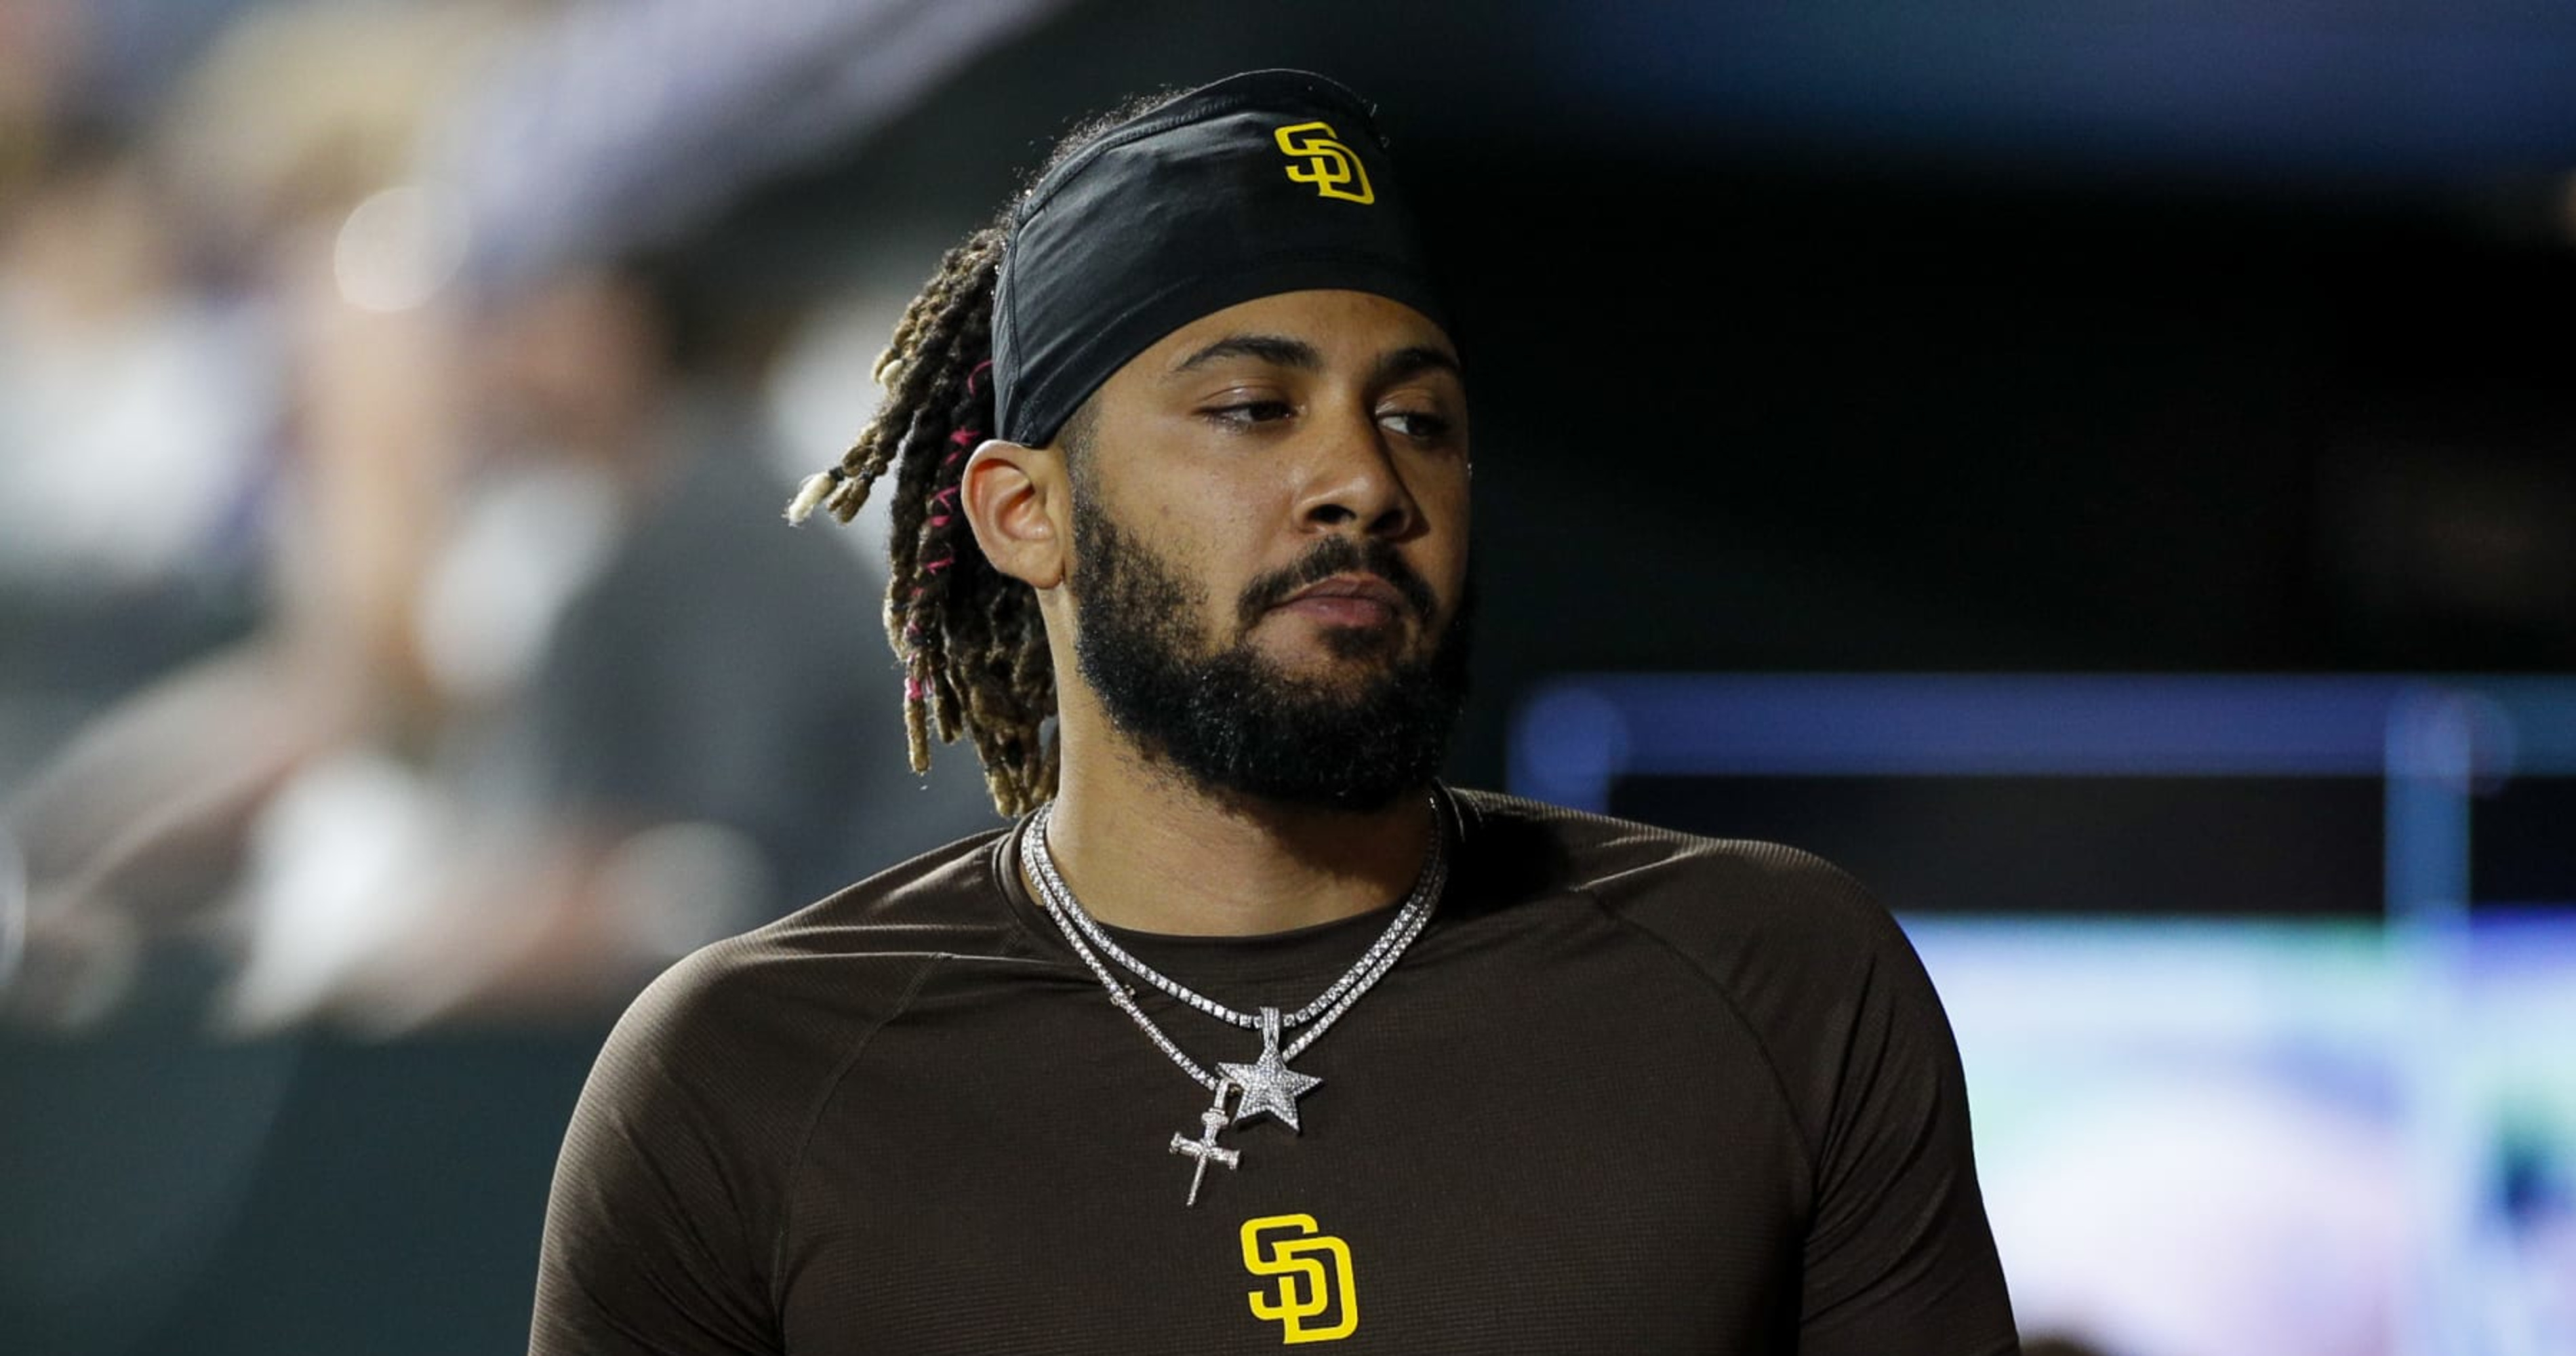 Tatis back in lineup for Padres after 80-game PED suspension